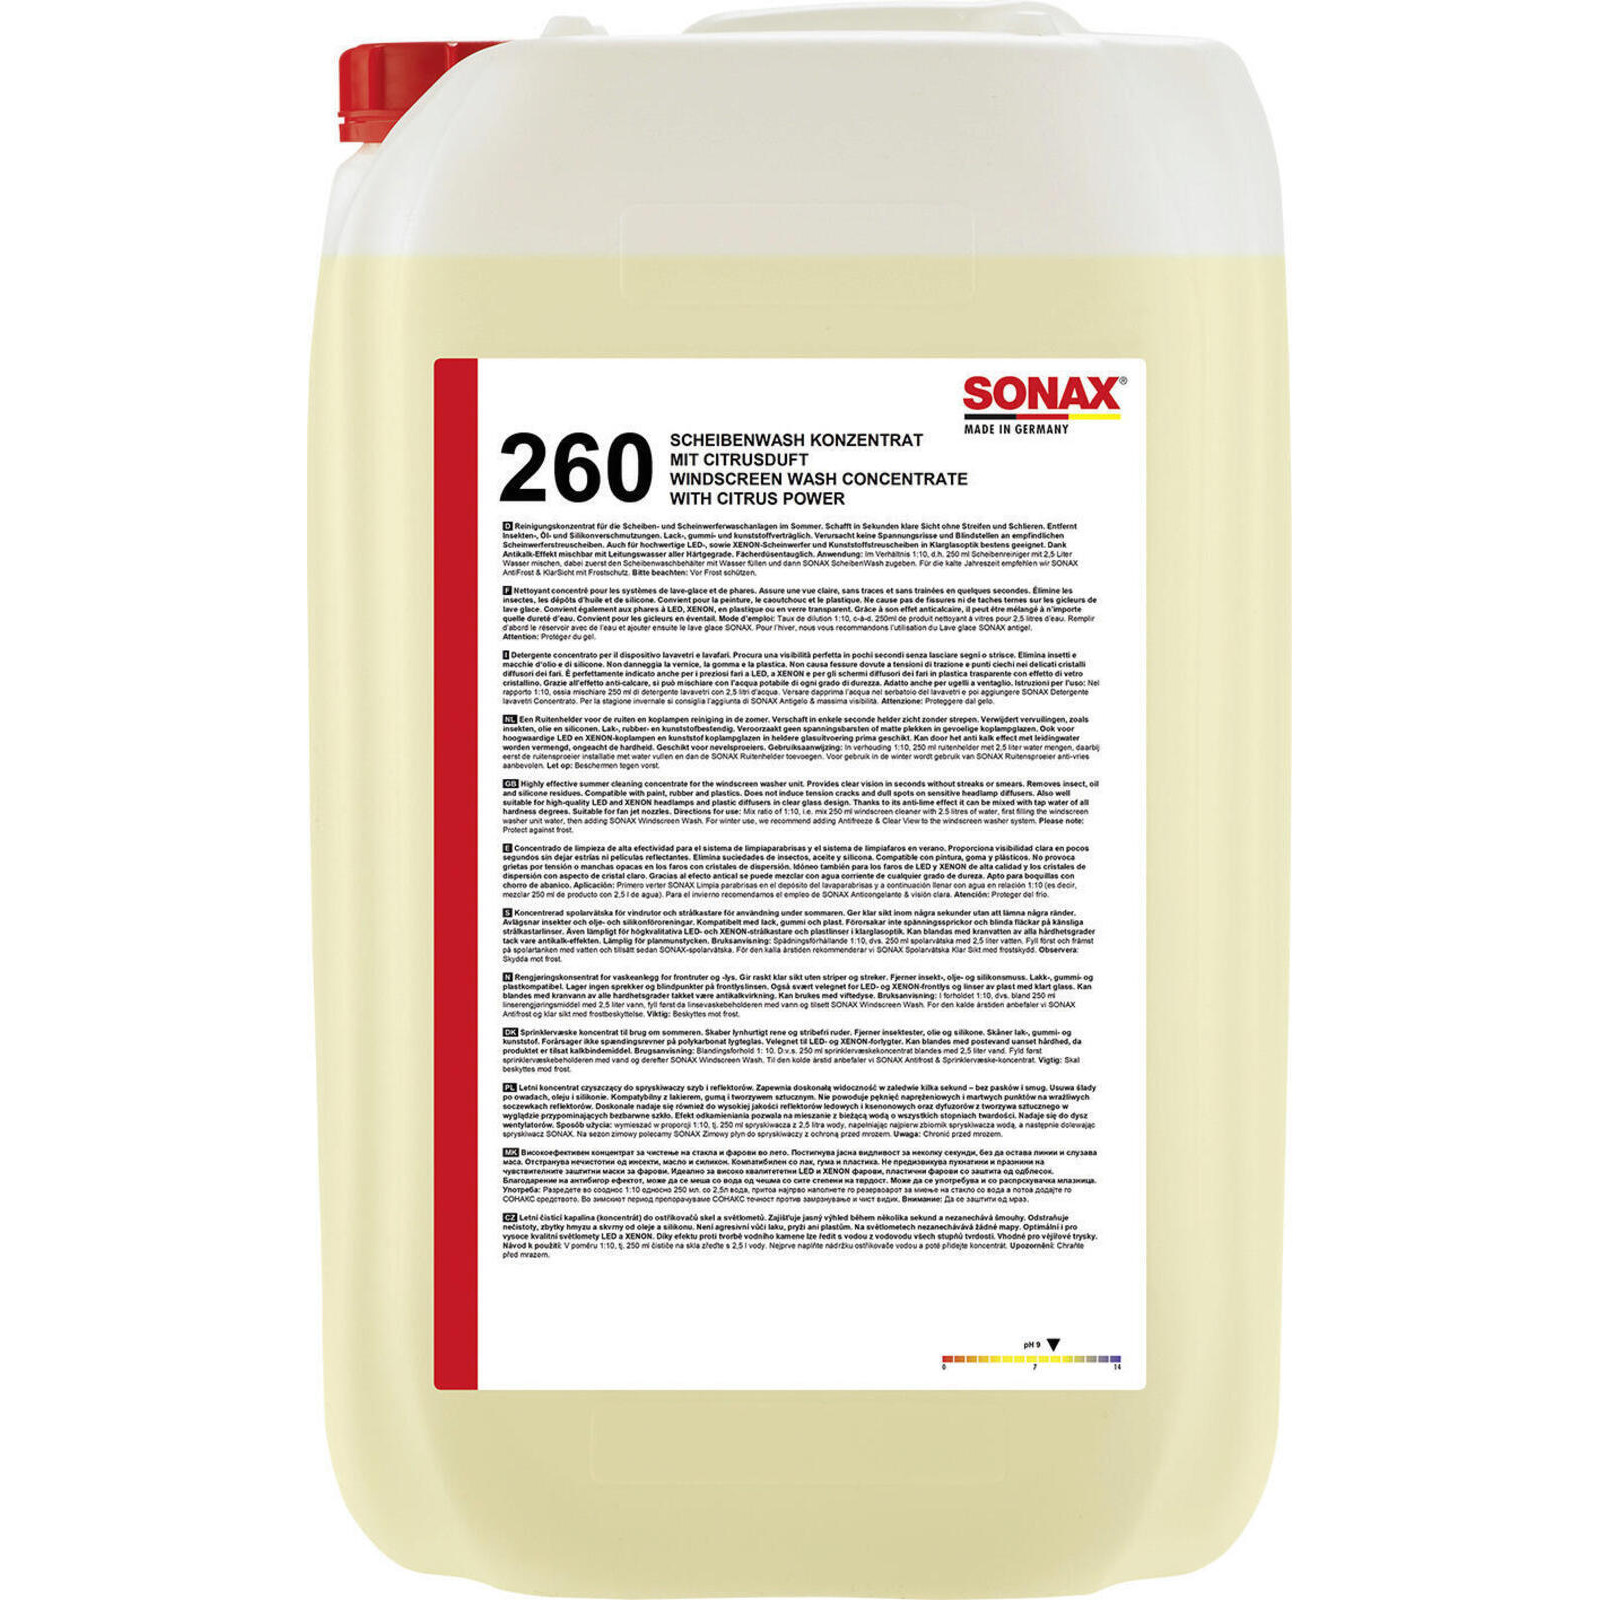 SONAX Cleaner, window cleaning system Windscreen wash concentrate 1:10 citrus